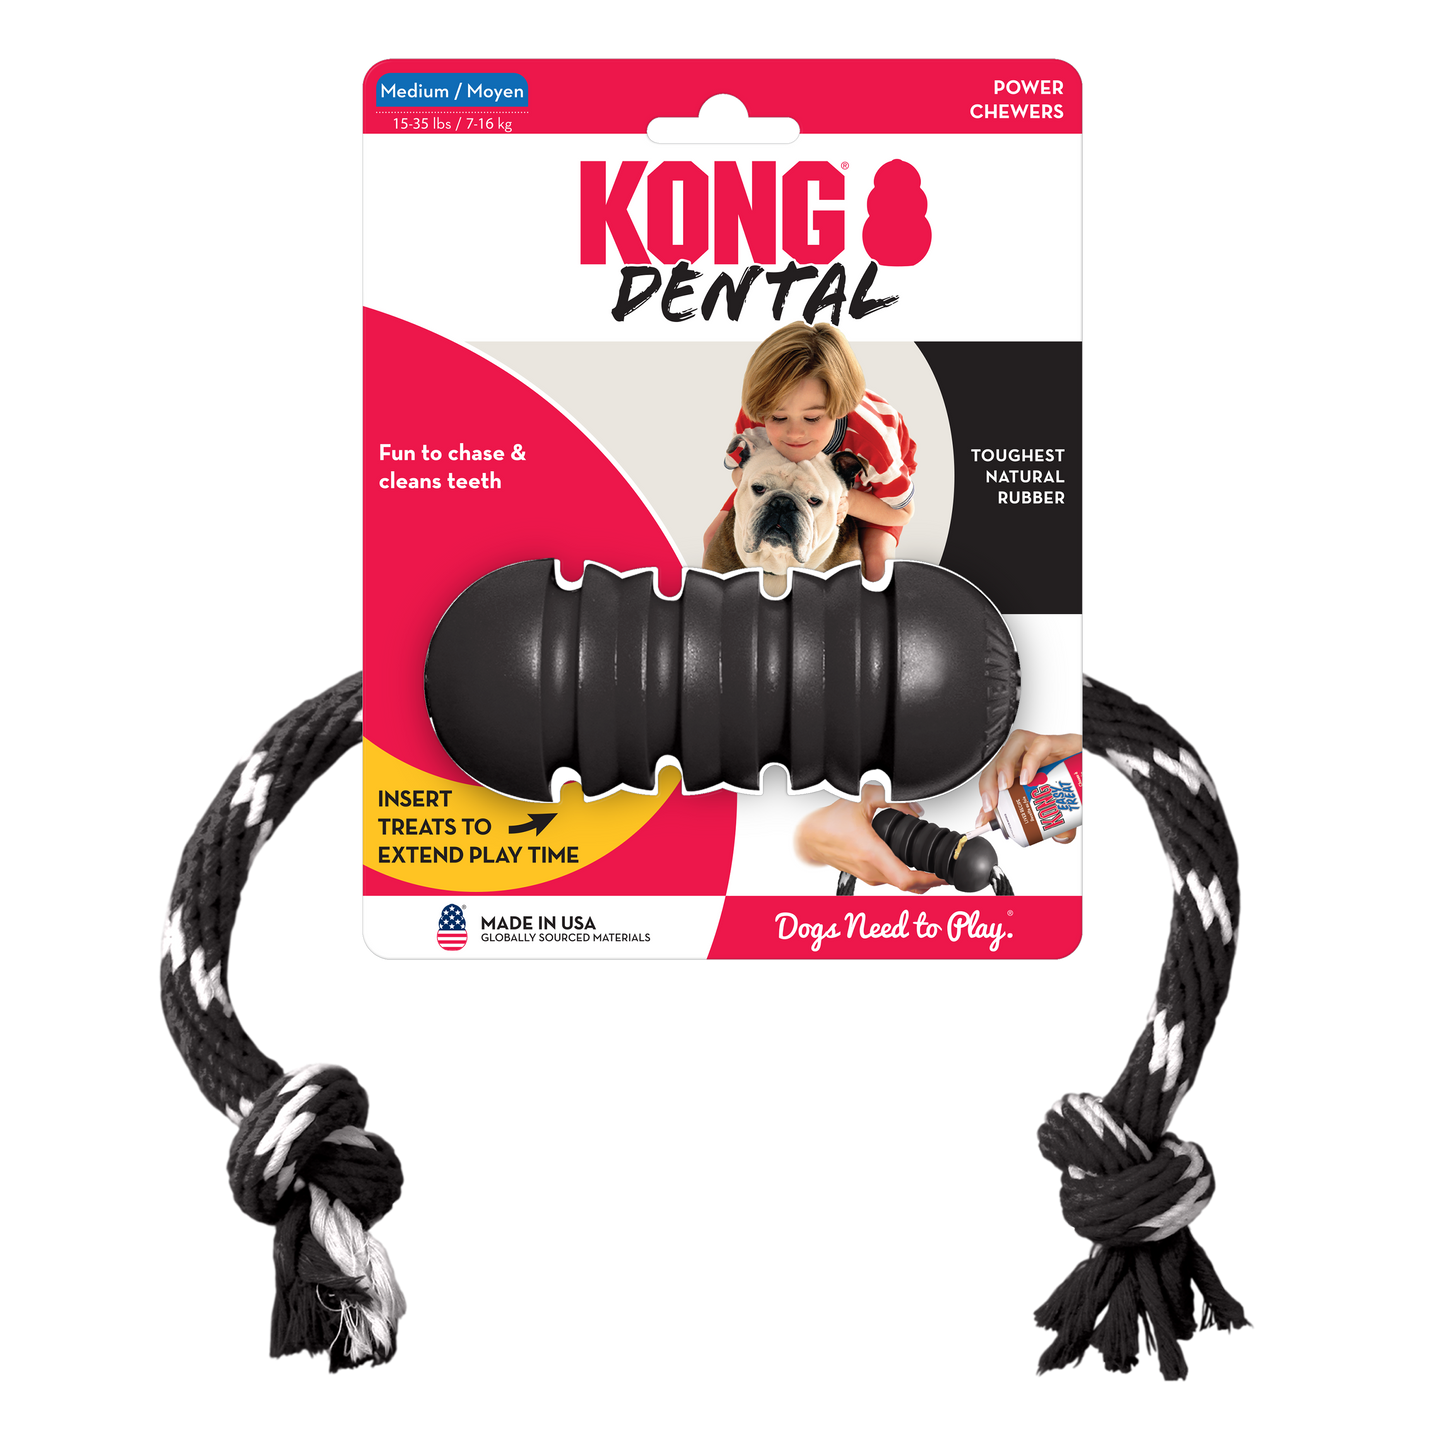 Your Whole Dog's SALE: KONG Dental Extreme with Rope is a rubber dog toy specially designed for teeth cleaning. This innovative product, known as KONG Dental, offers an effective solution for maintaining your dog's dental hygiene.